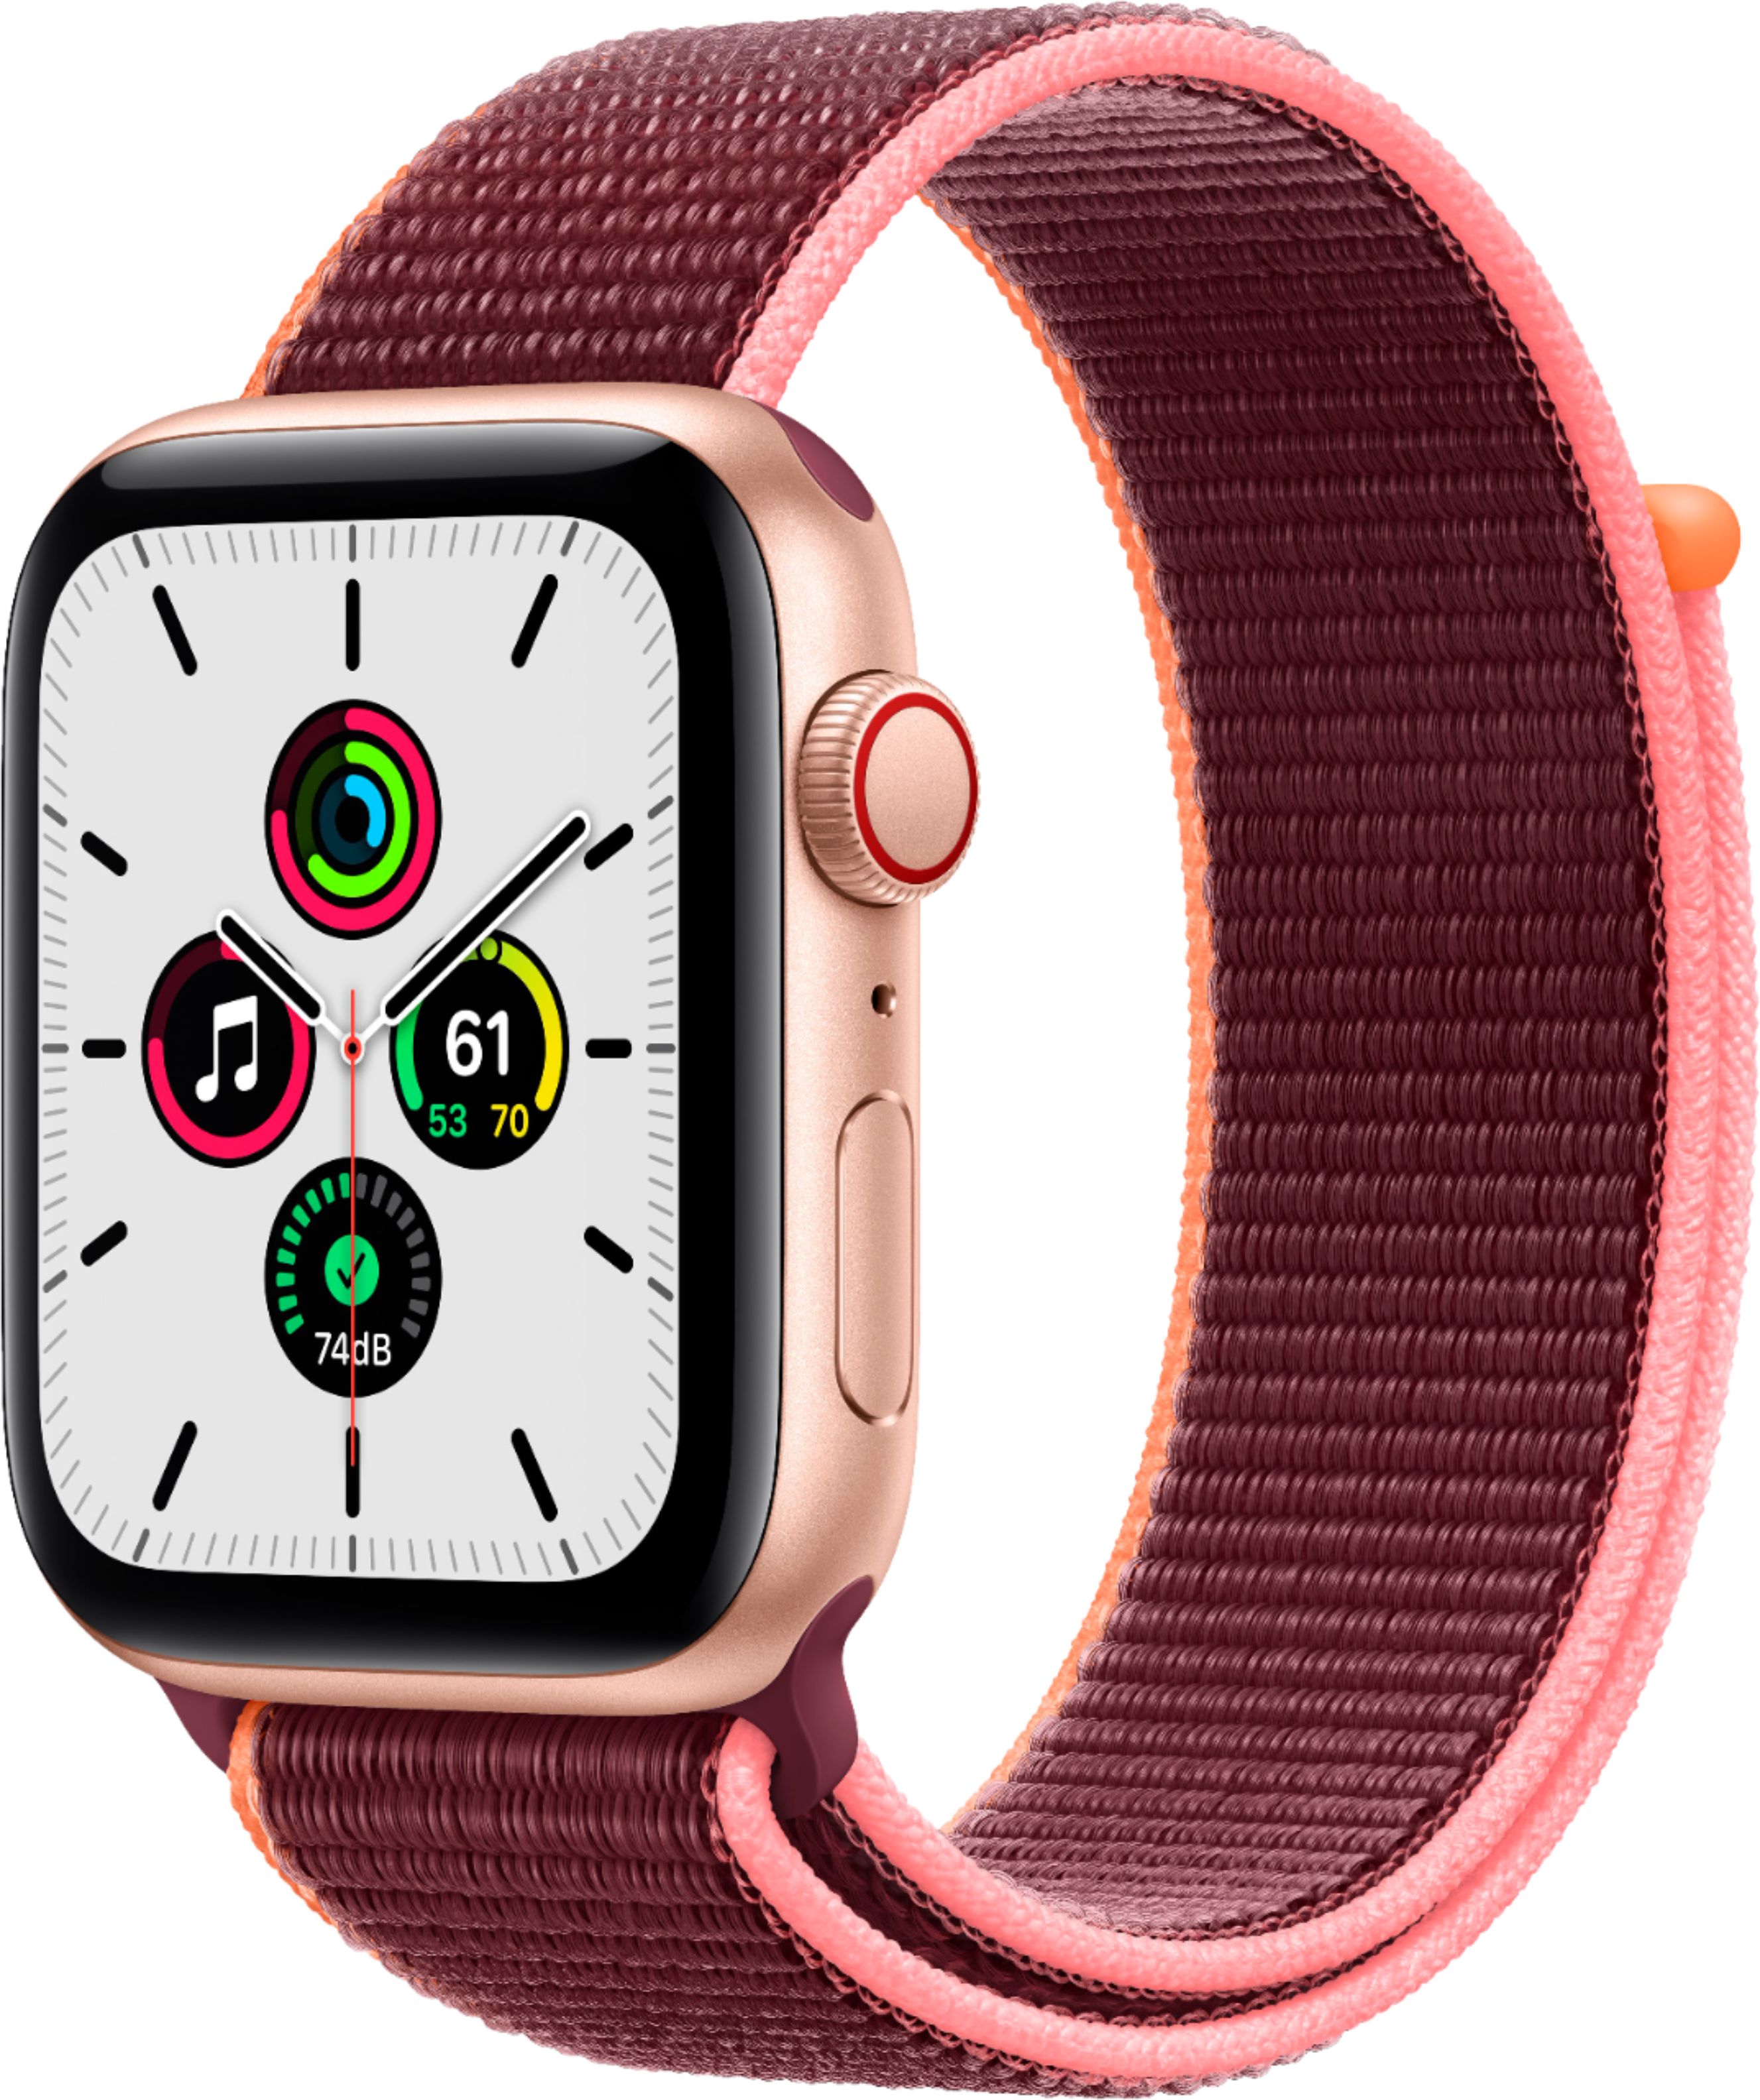 Questions and Answers: Apple Watch SE (1st Generation, GPS + Cellular